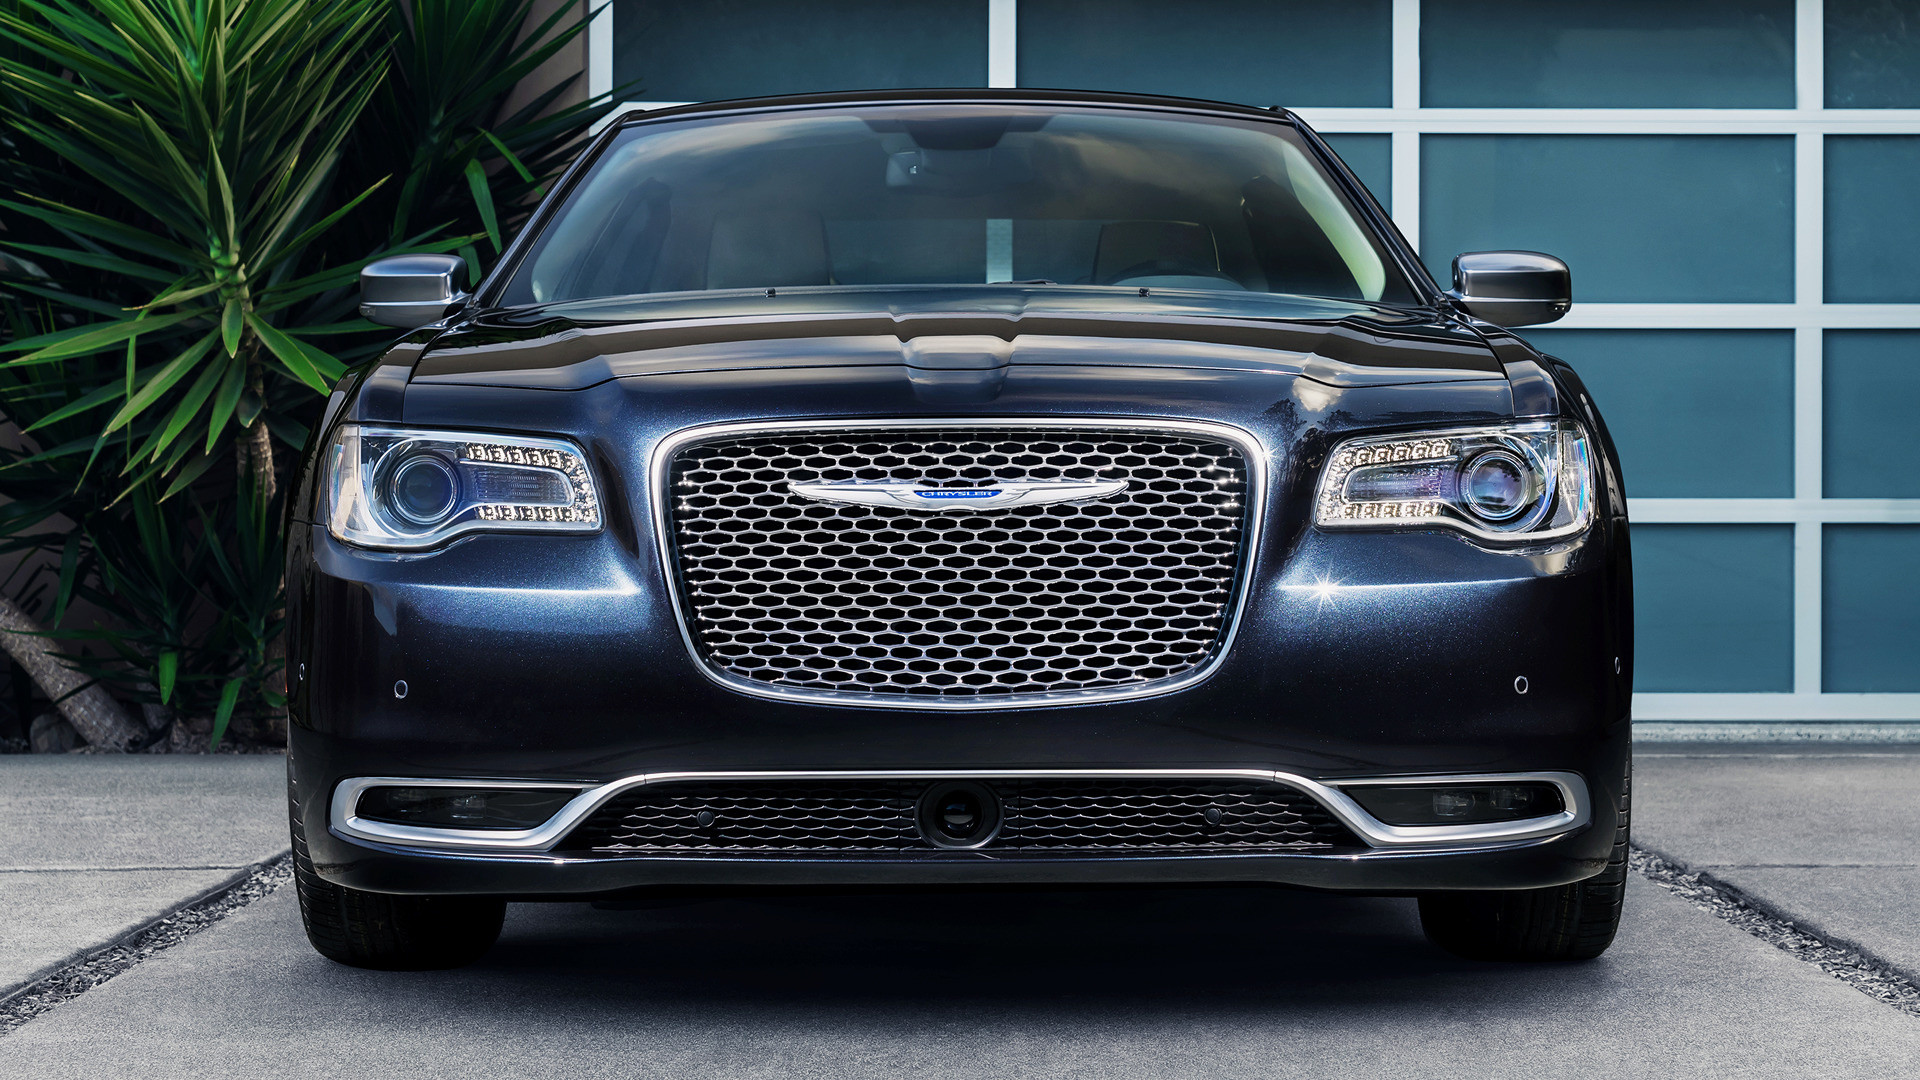 1920x1080 Nelson Flores - Chrysler 300 Wallpapers